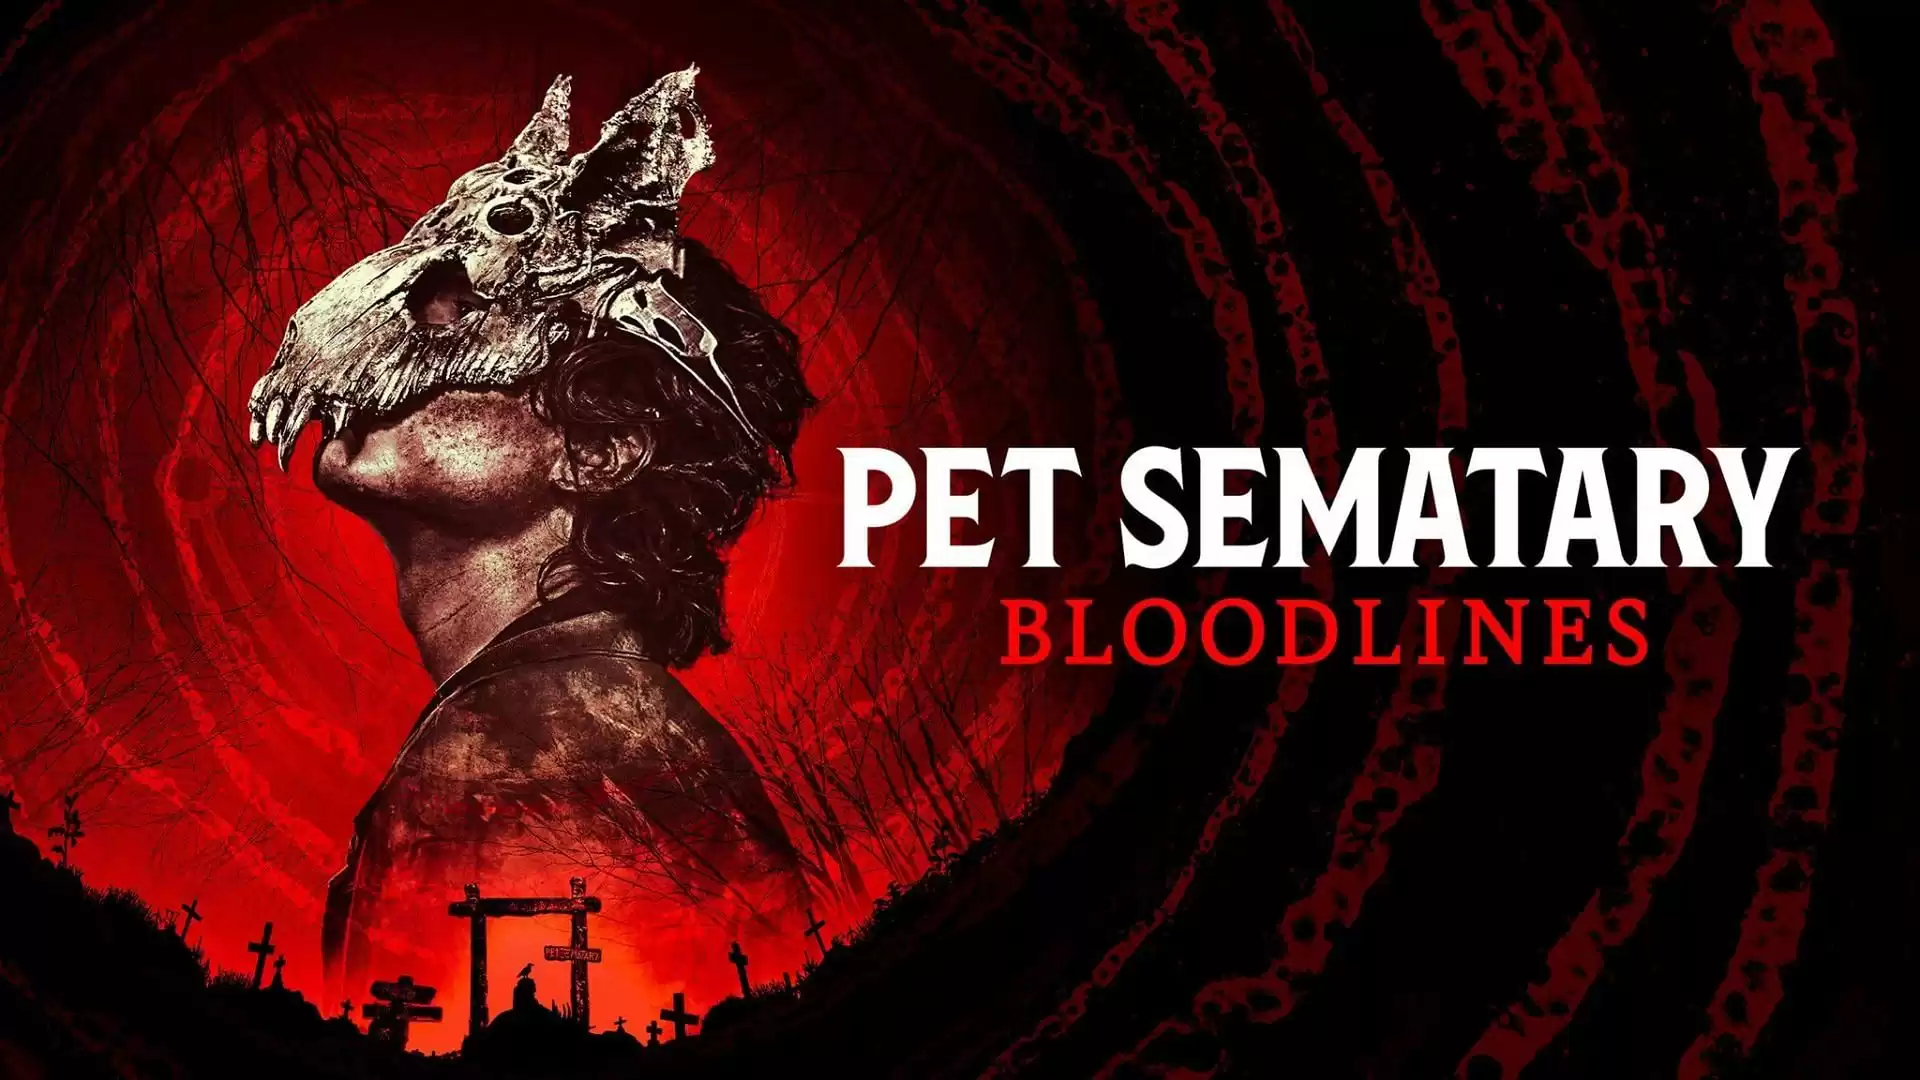 How to Watch Pet Sematary: Bloodlines at Home? Streaming Platform, Release Date, and More